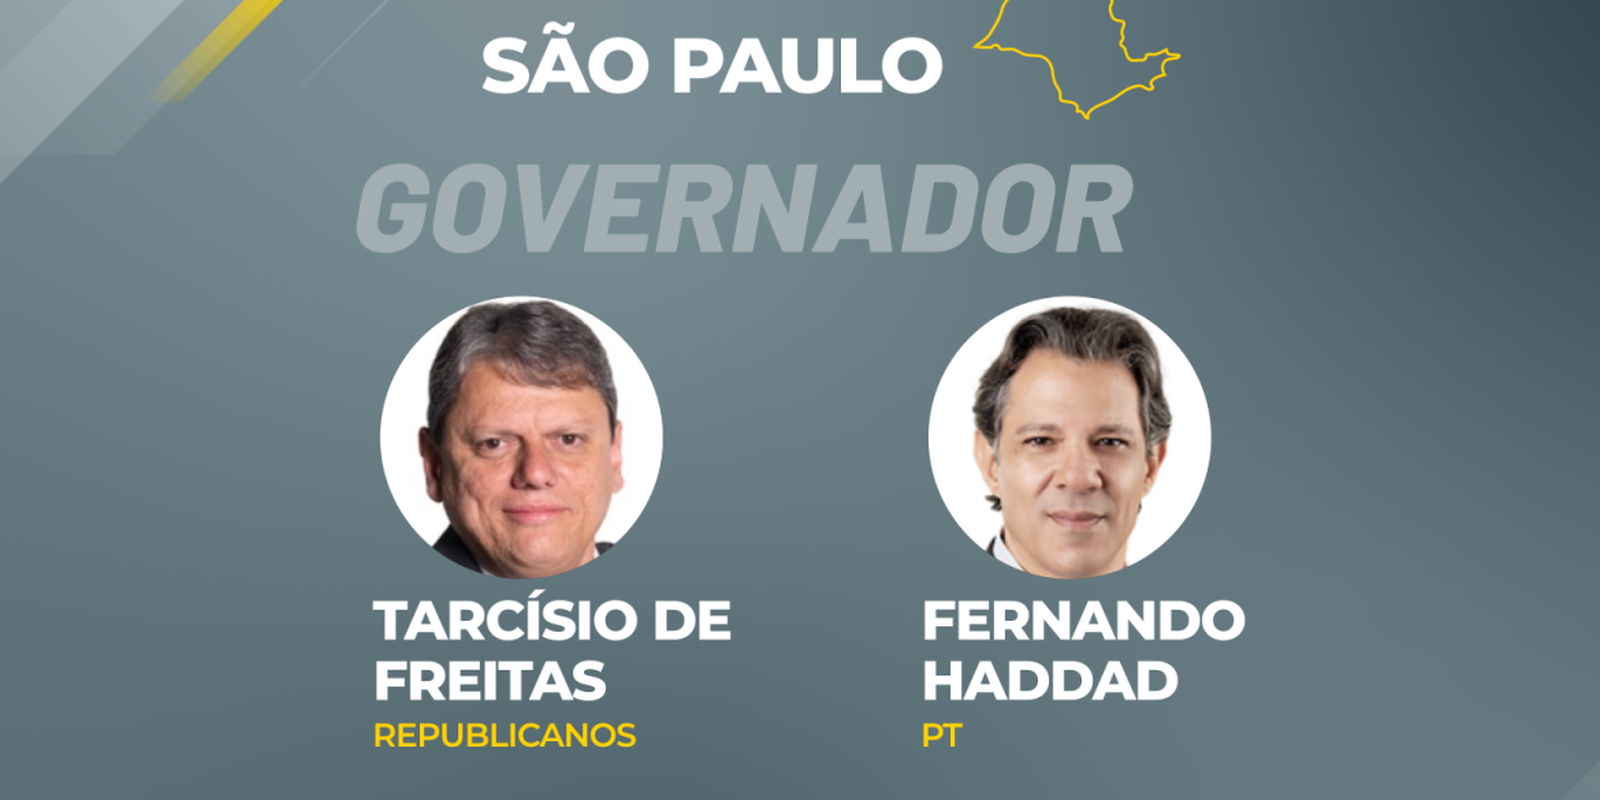 Tarcísio is elected governor of SP